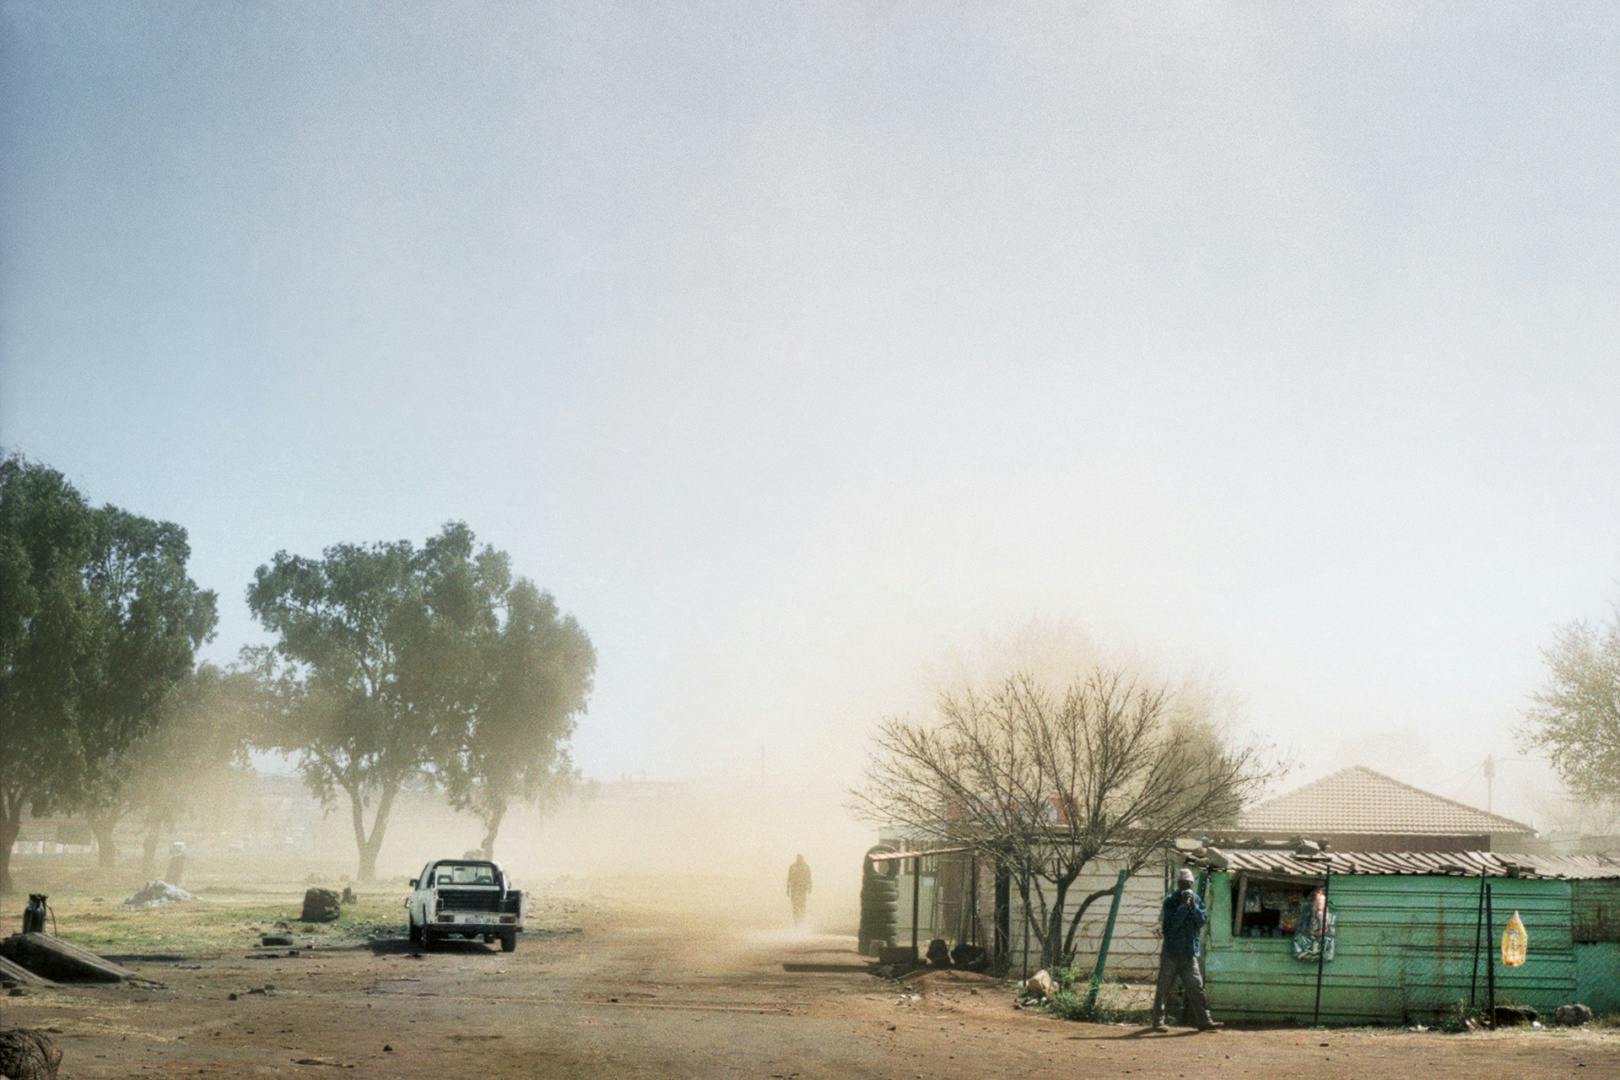 A dusty landscape with a pick up truck and several buildings